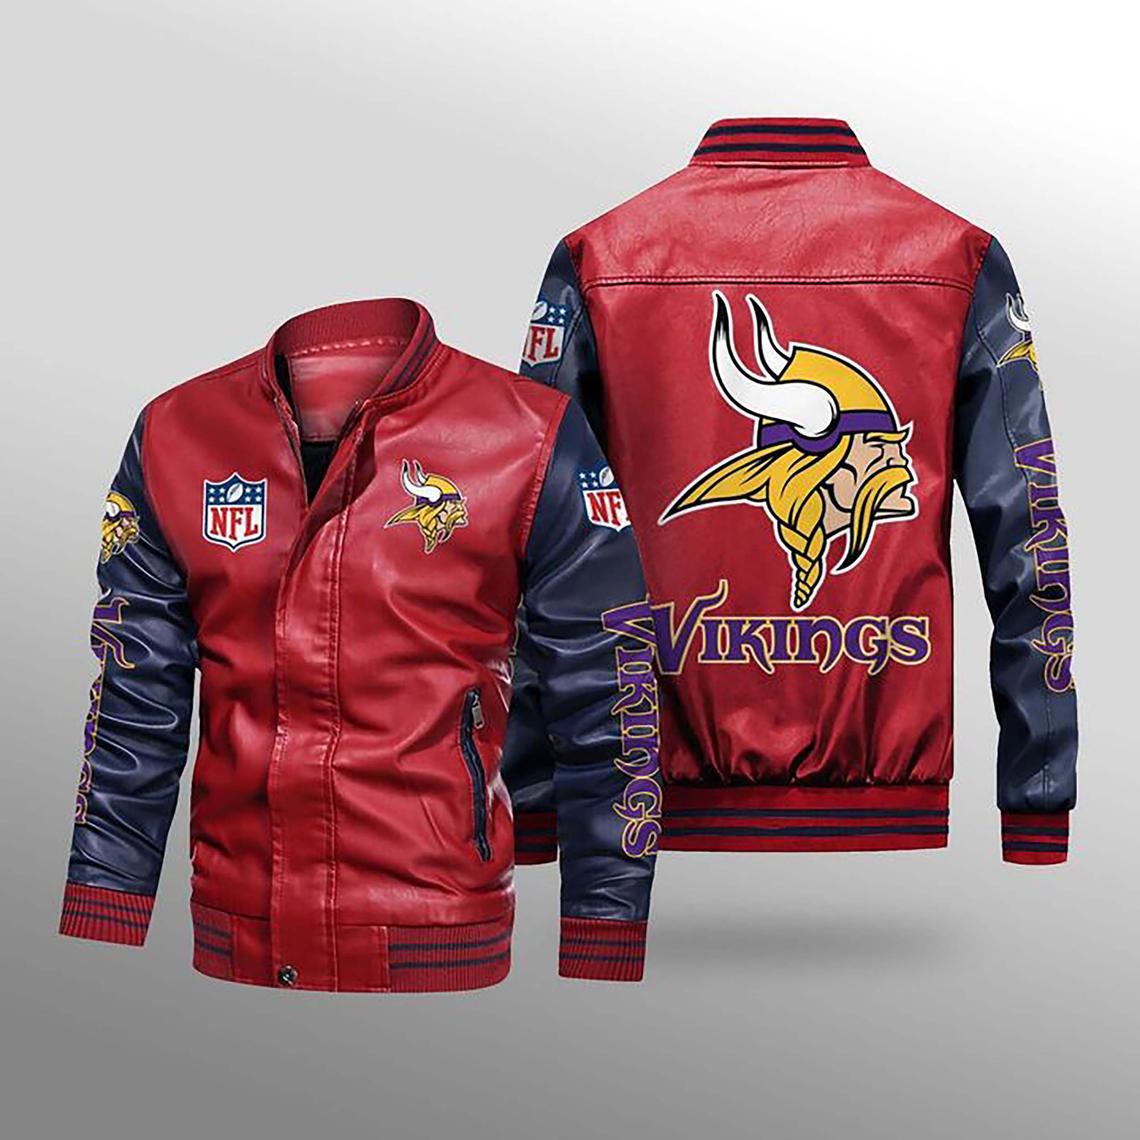 30% OFF The Best Men's Minnesota Vikings Leather Jacket For Sale – 4 ...